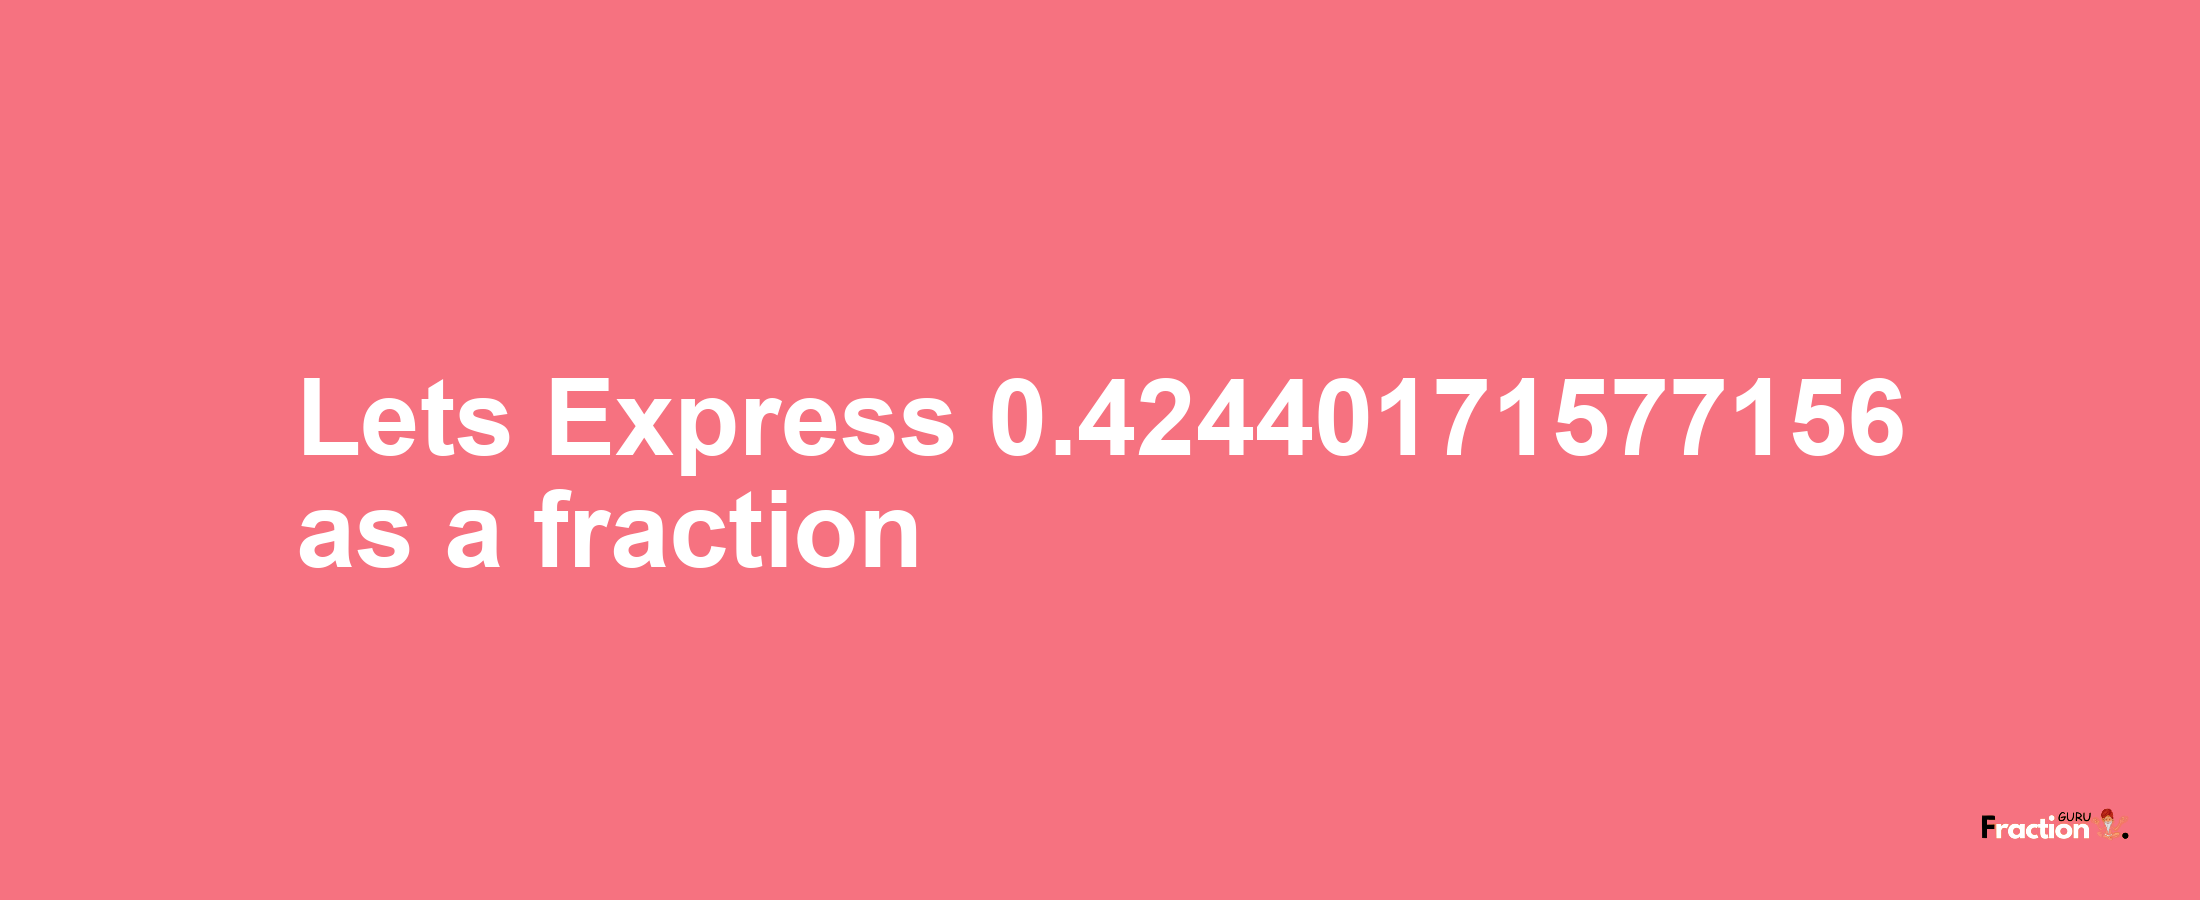 Lets Express 0.42440171577156 as afraction